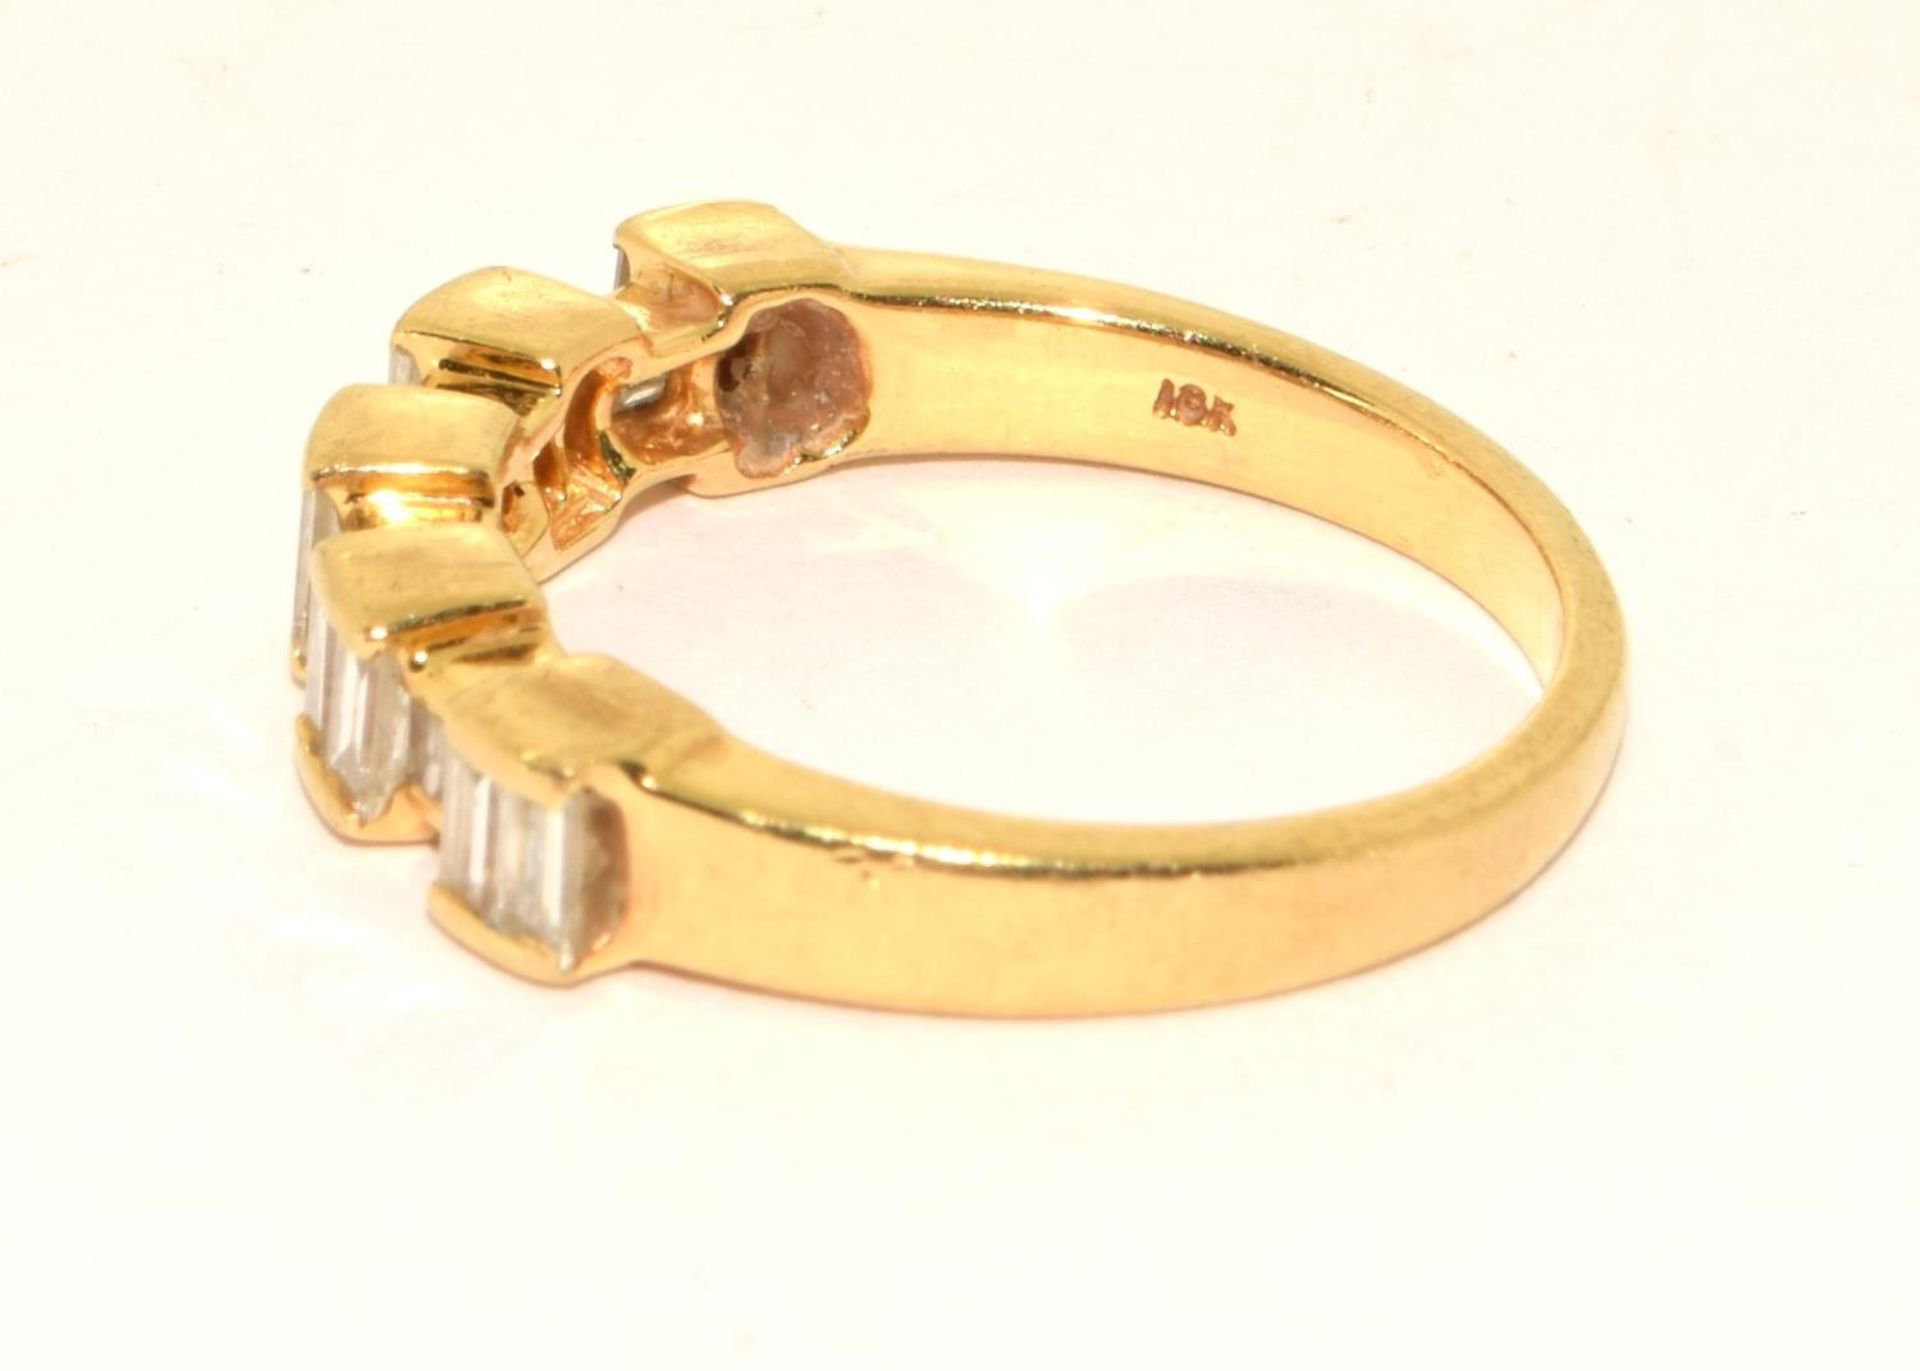 Diamond Baguettes set in 18ct gold 4.8g ring size P - Image 2 of 5